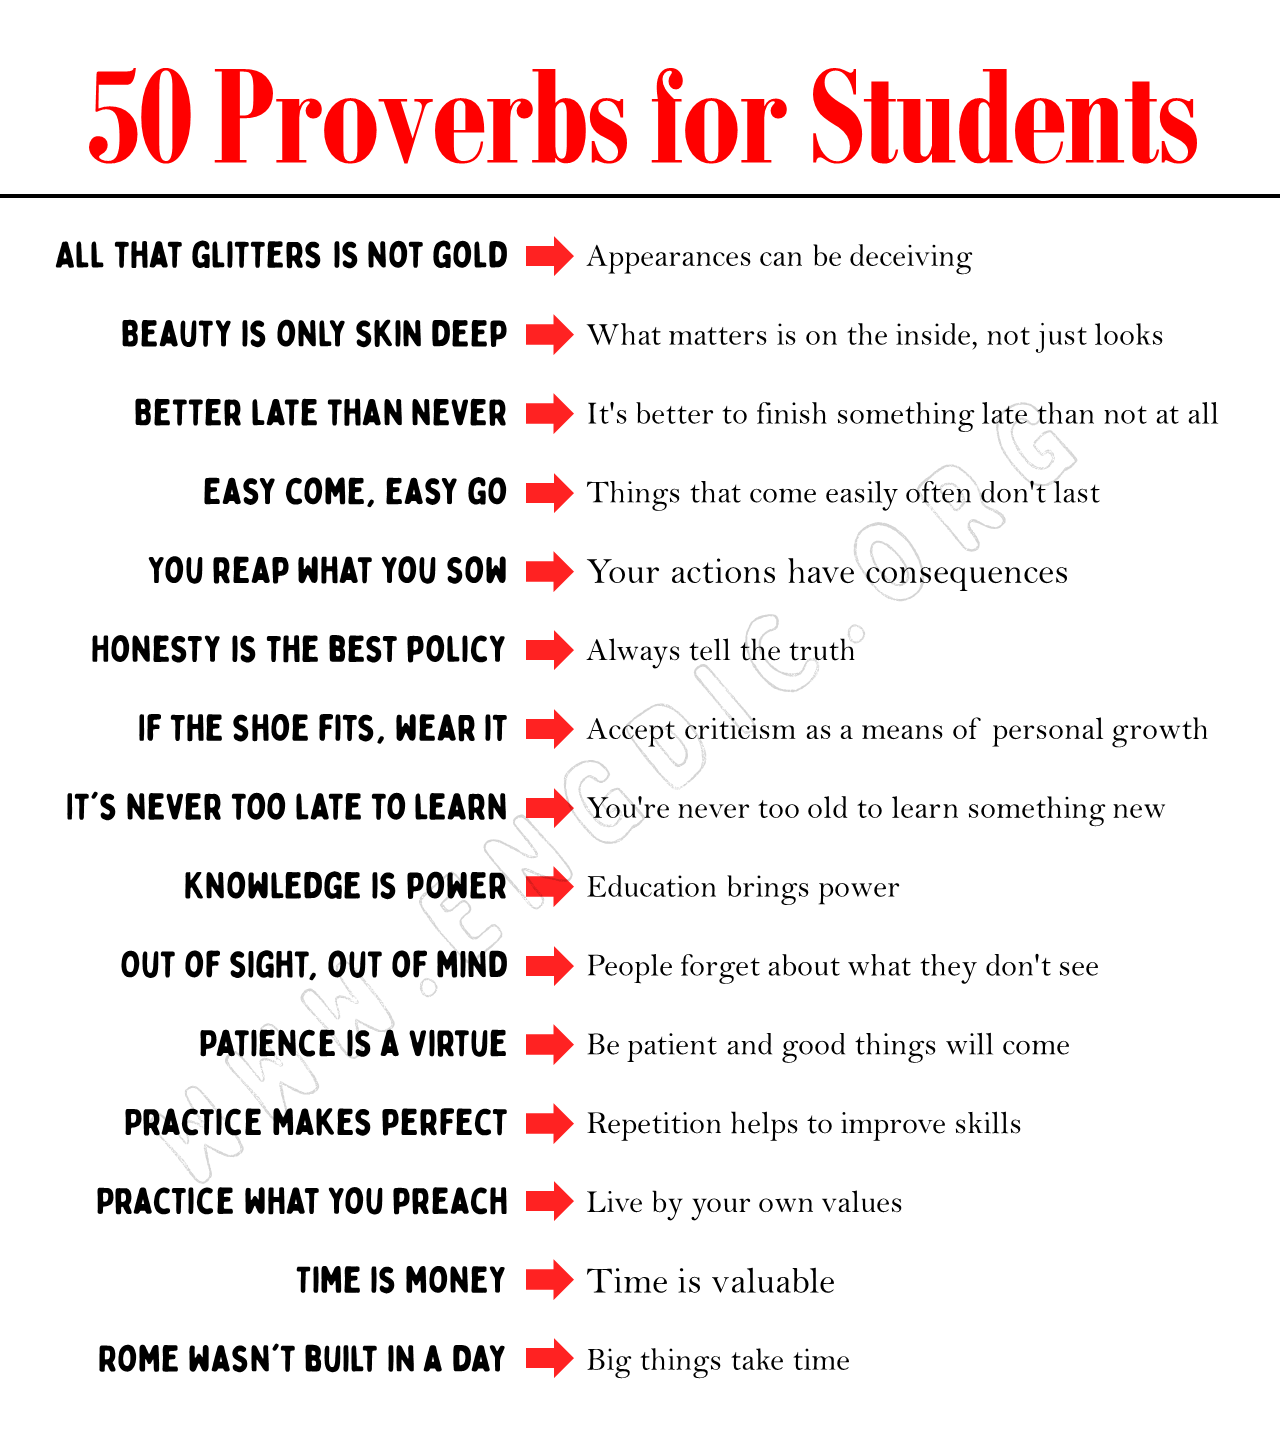 50 Proverbs for Students